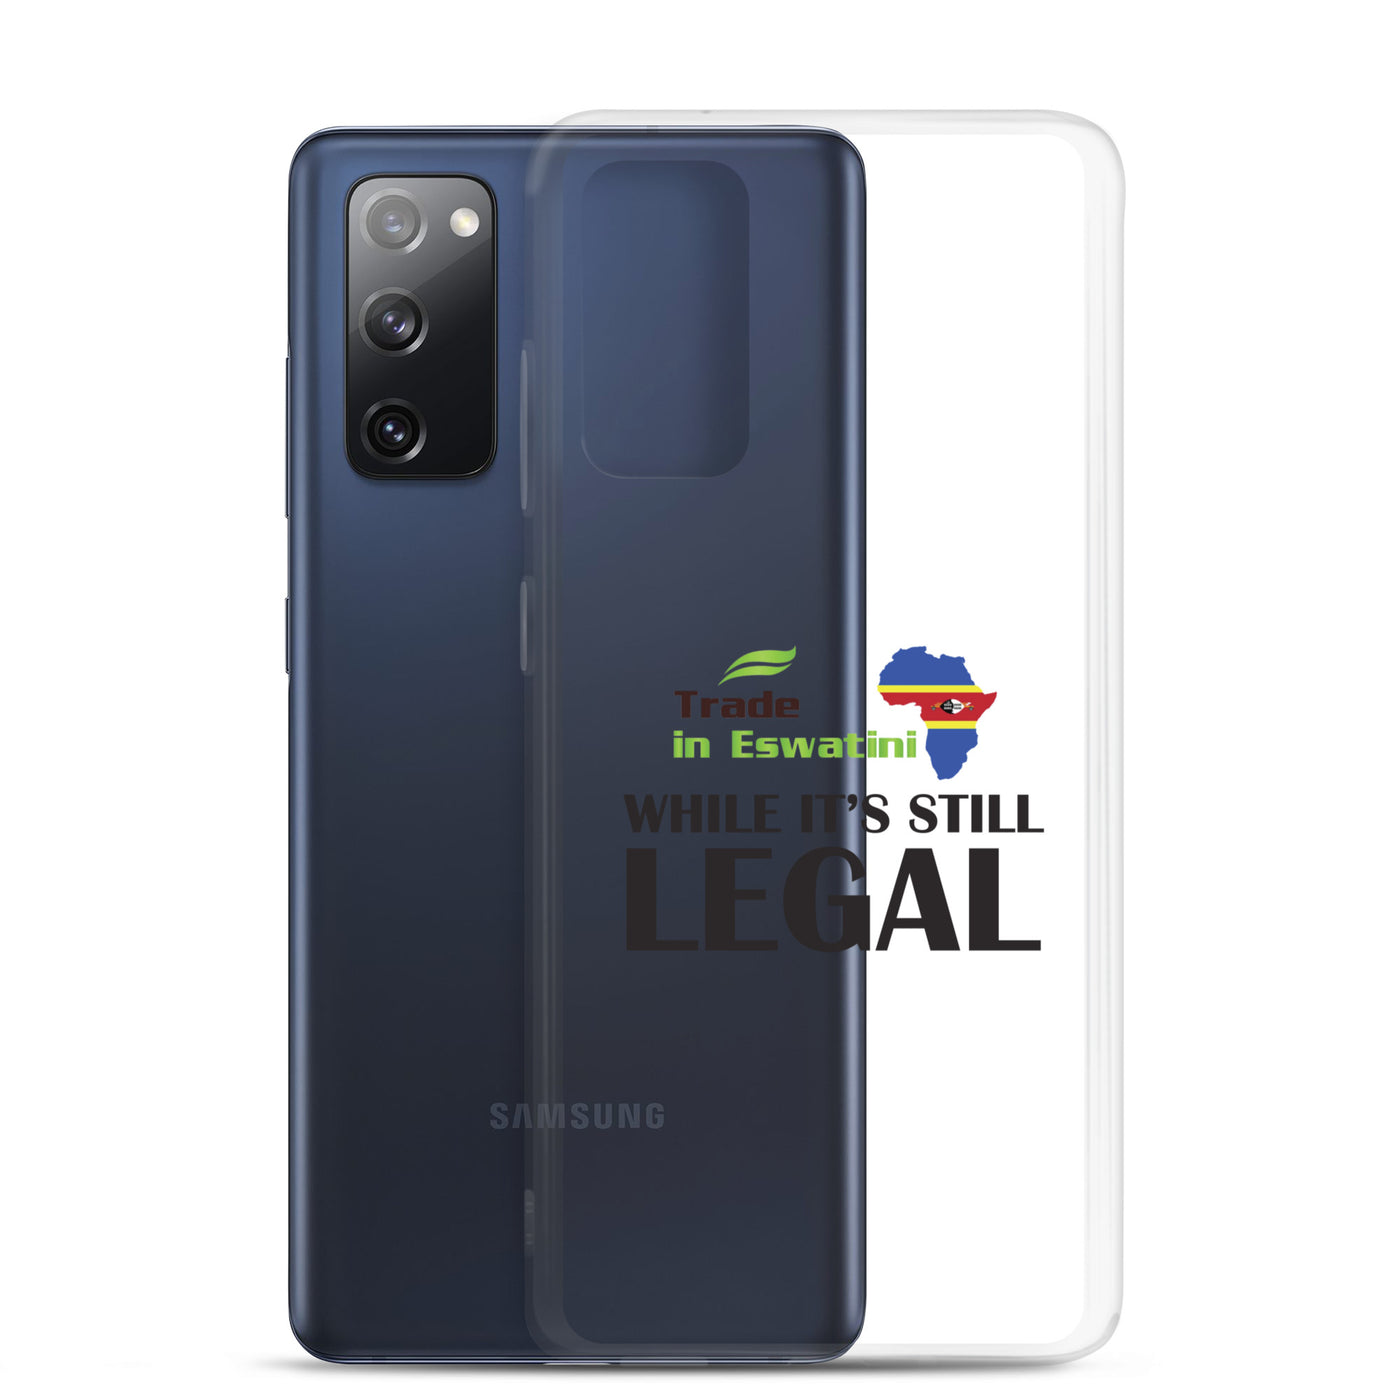 While It's Still Legal - Trade In Eswatini Samsung Case